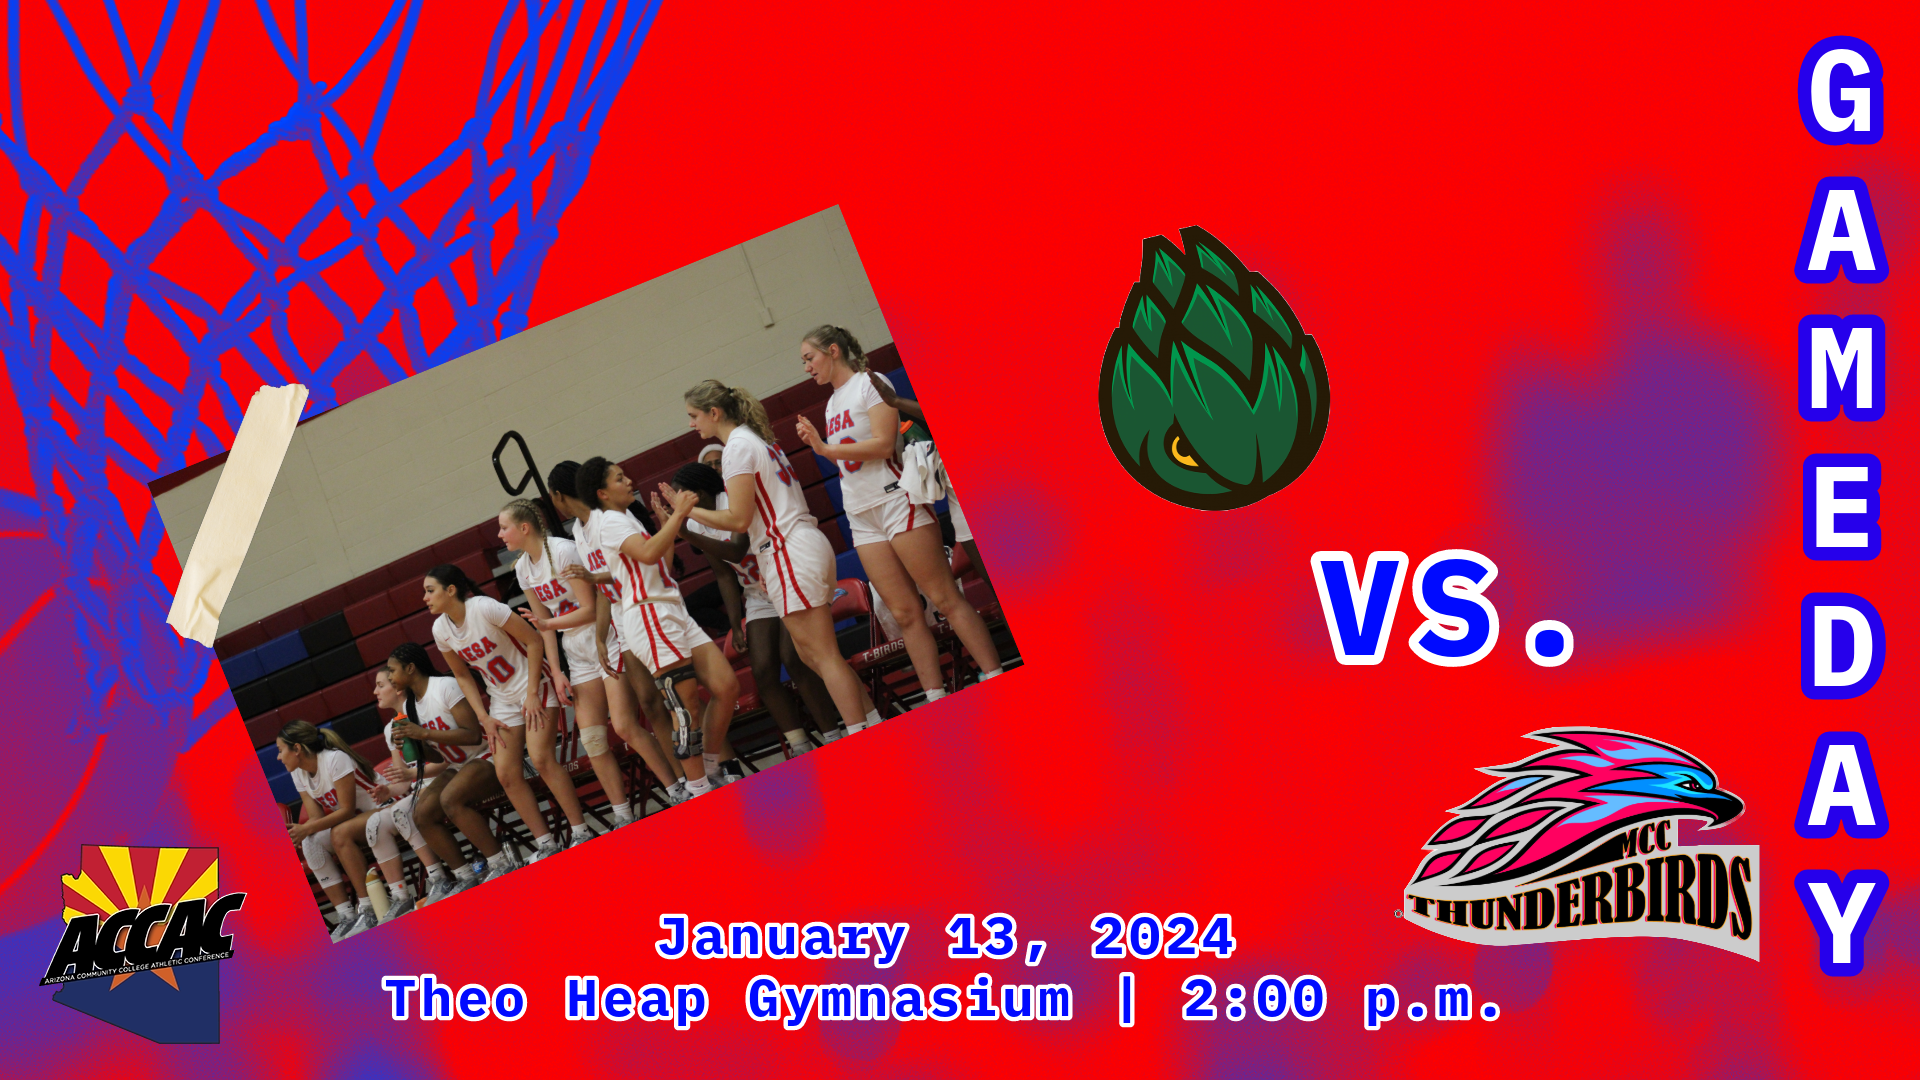 No. 10 Women's Basketball welcomes Scottsdale to Theo Heap Gymnasium on Saturday